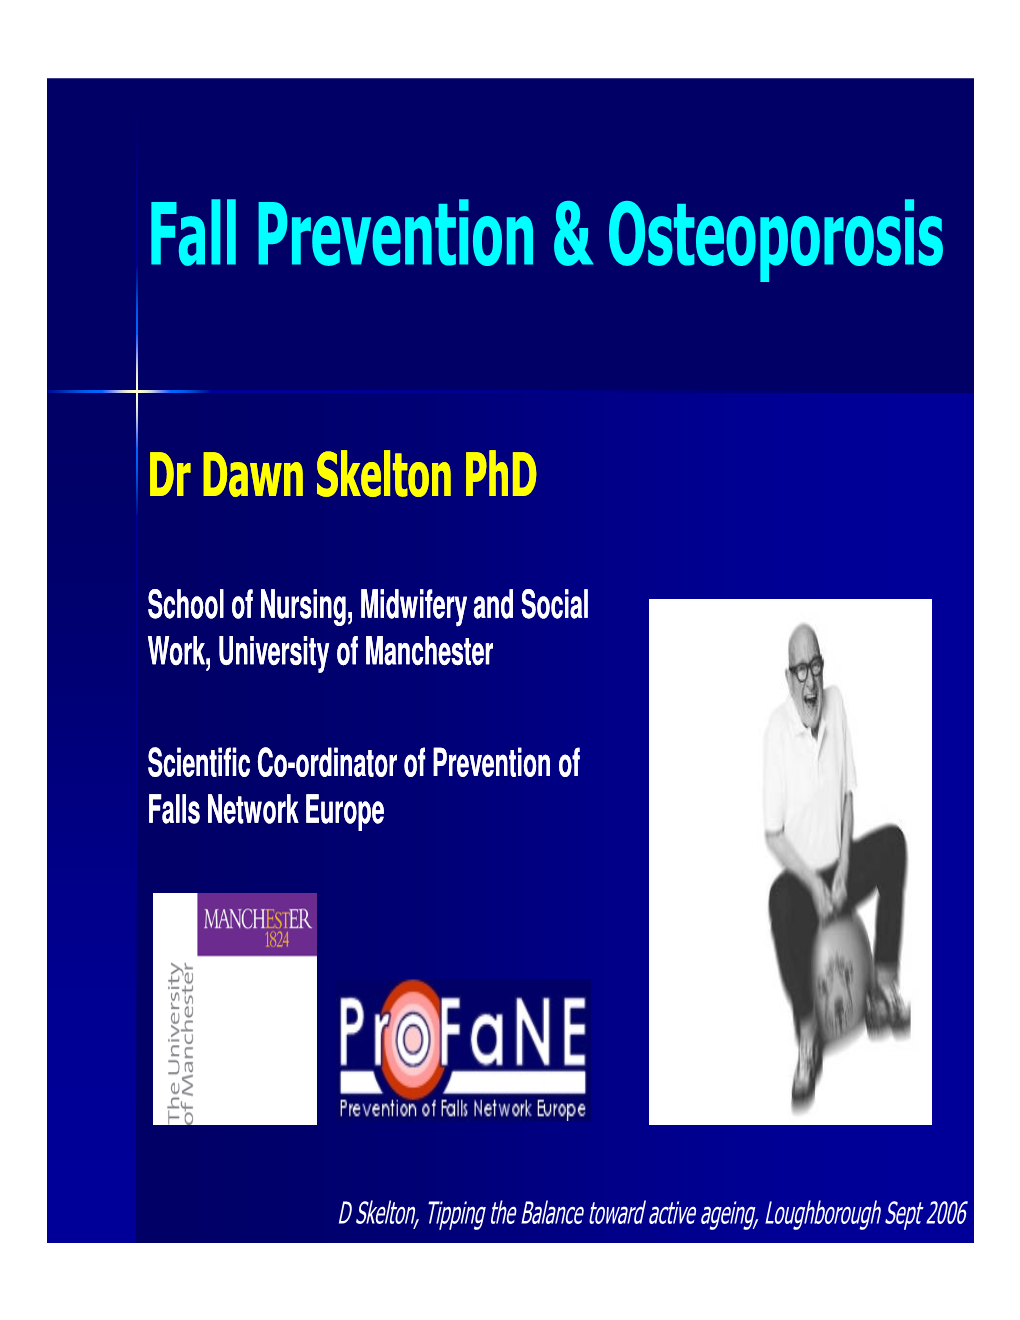 Fall Prevention & Osteoporosis